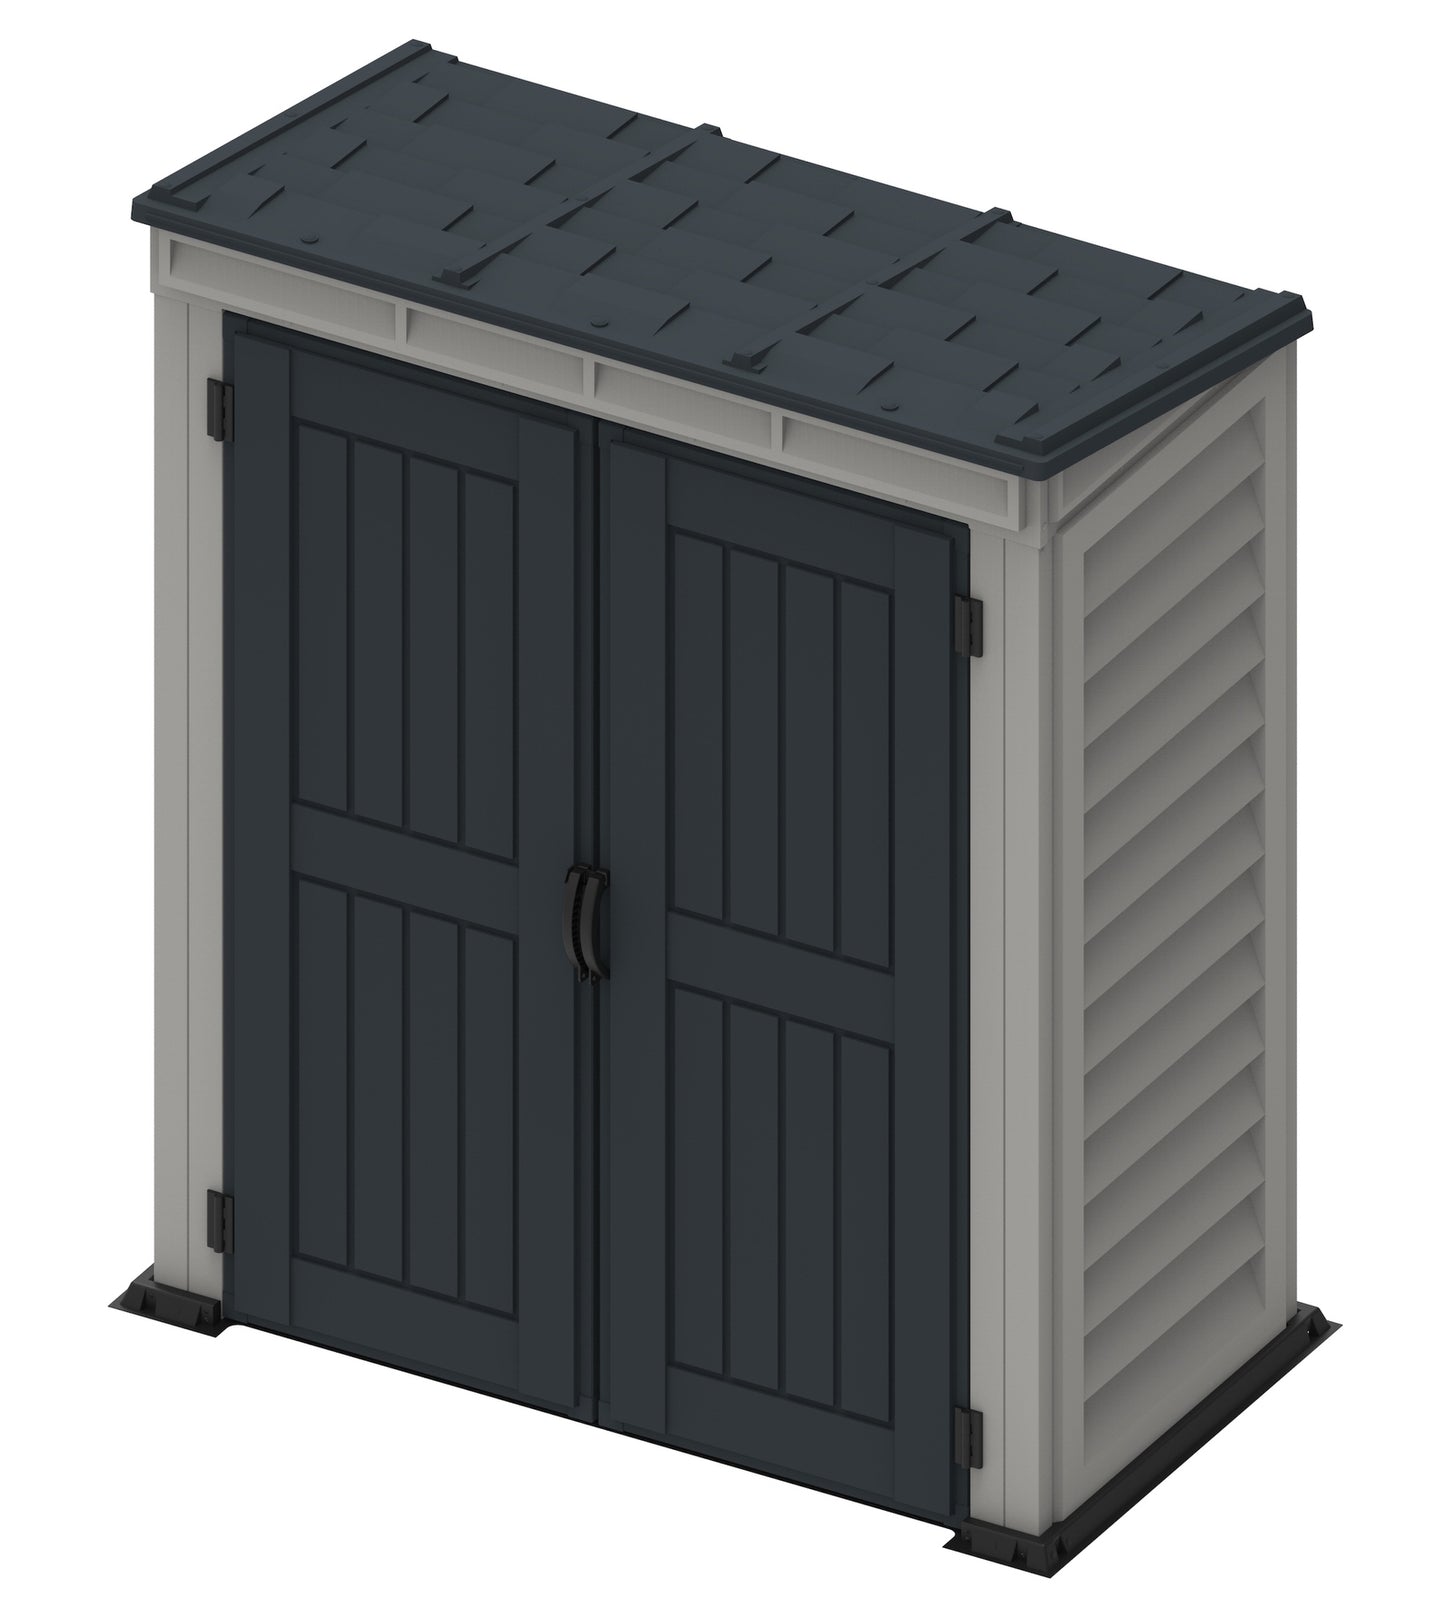 Duramax YardMate Plus Pent 5 ft. 6 in. x 3 ft. Gray Vinyl Storage Shed with Molded Floor (East Coast Purchase Only)